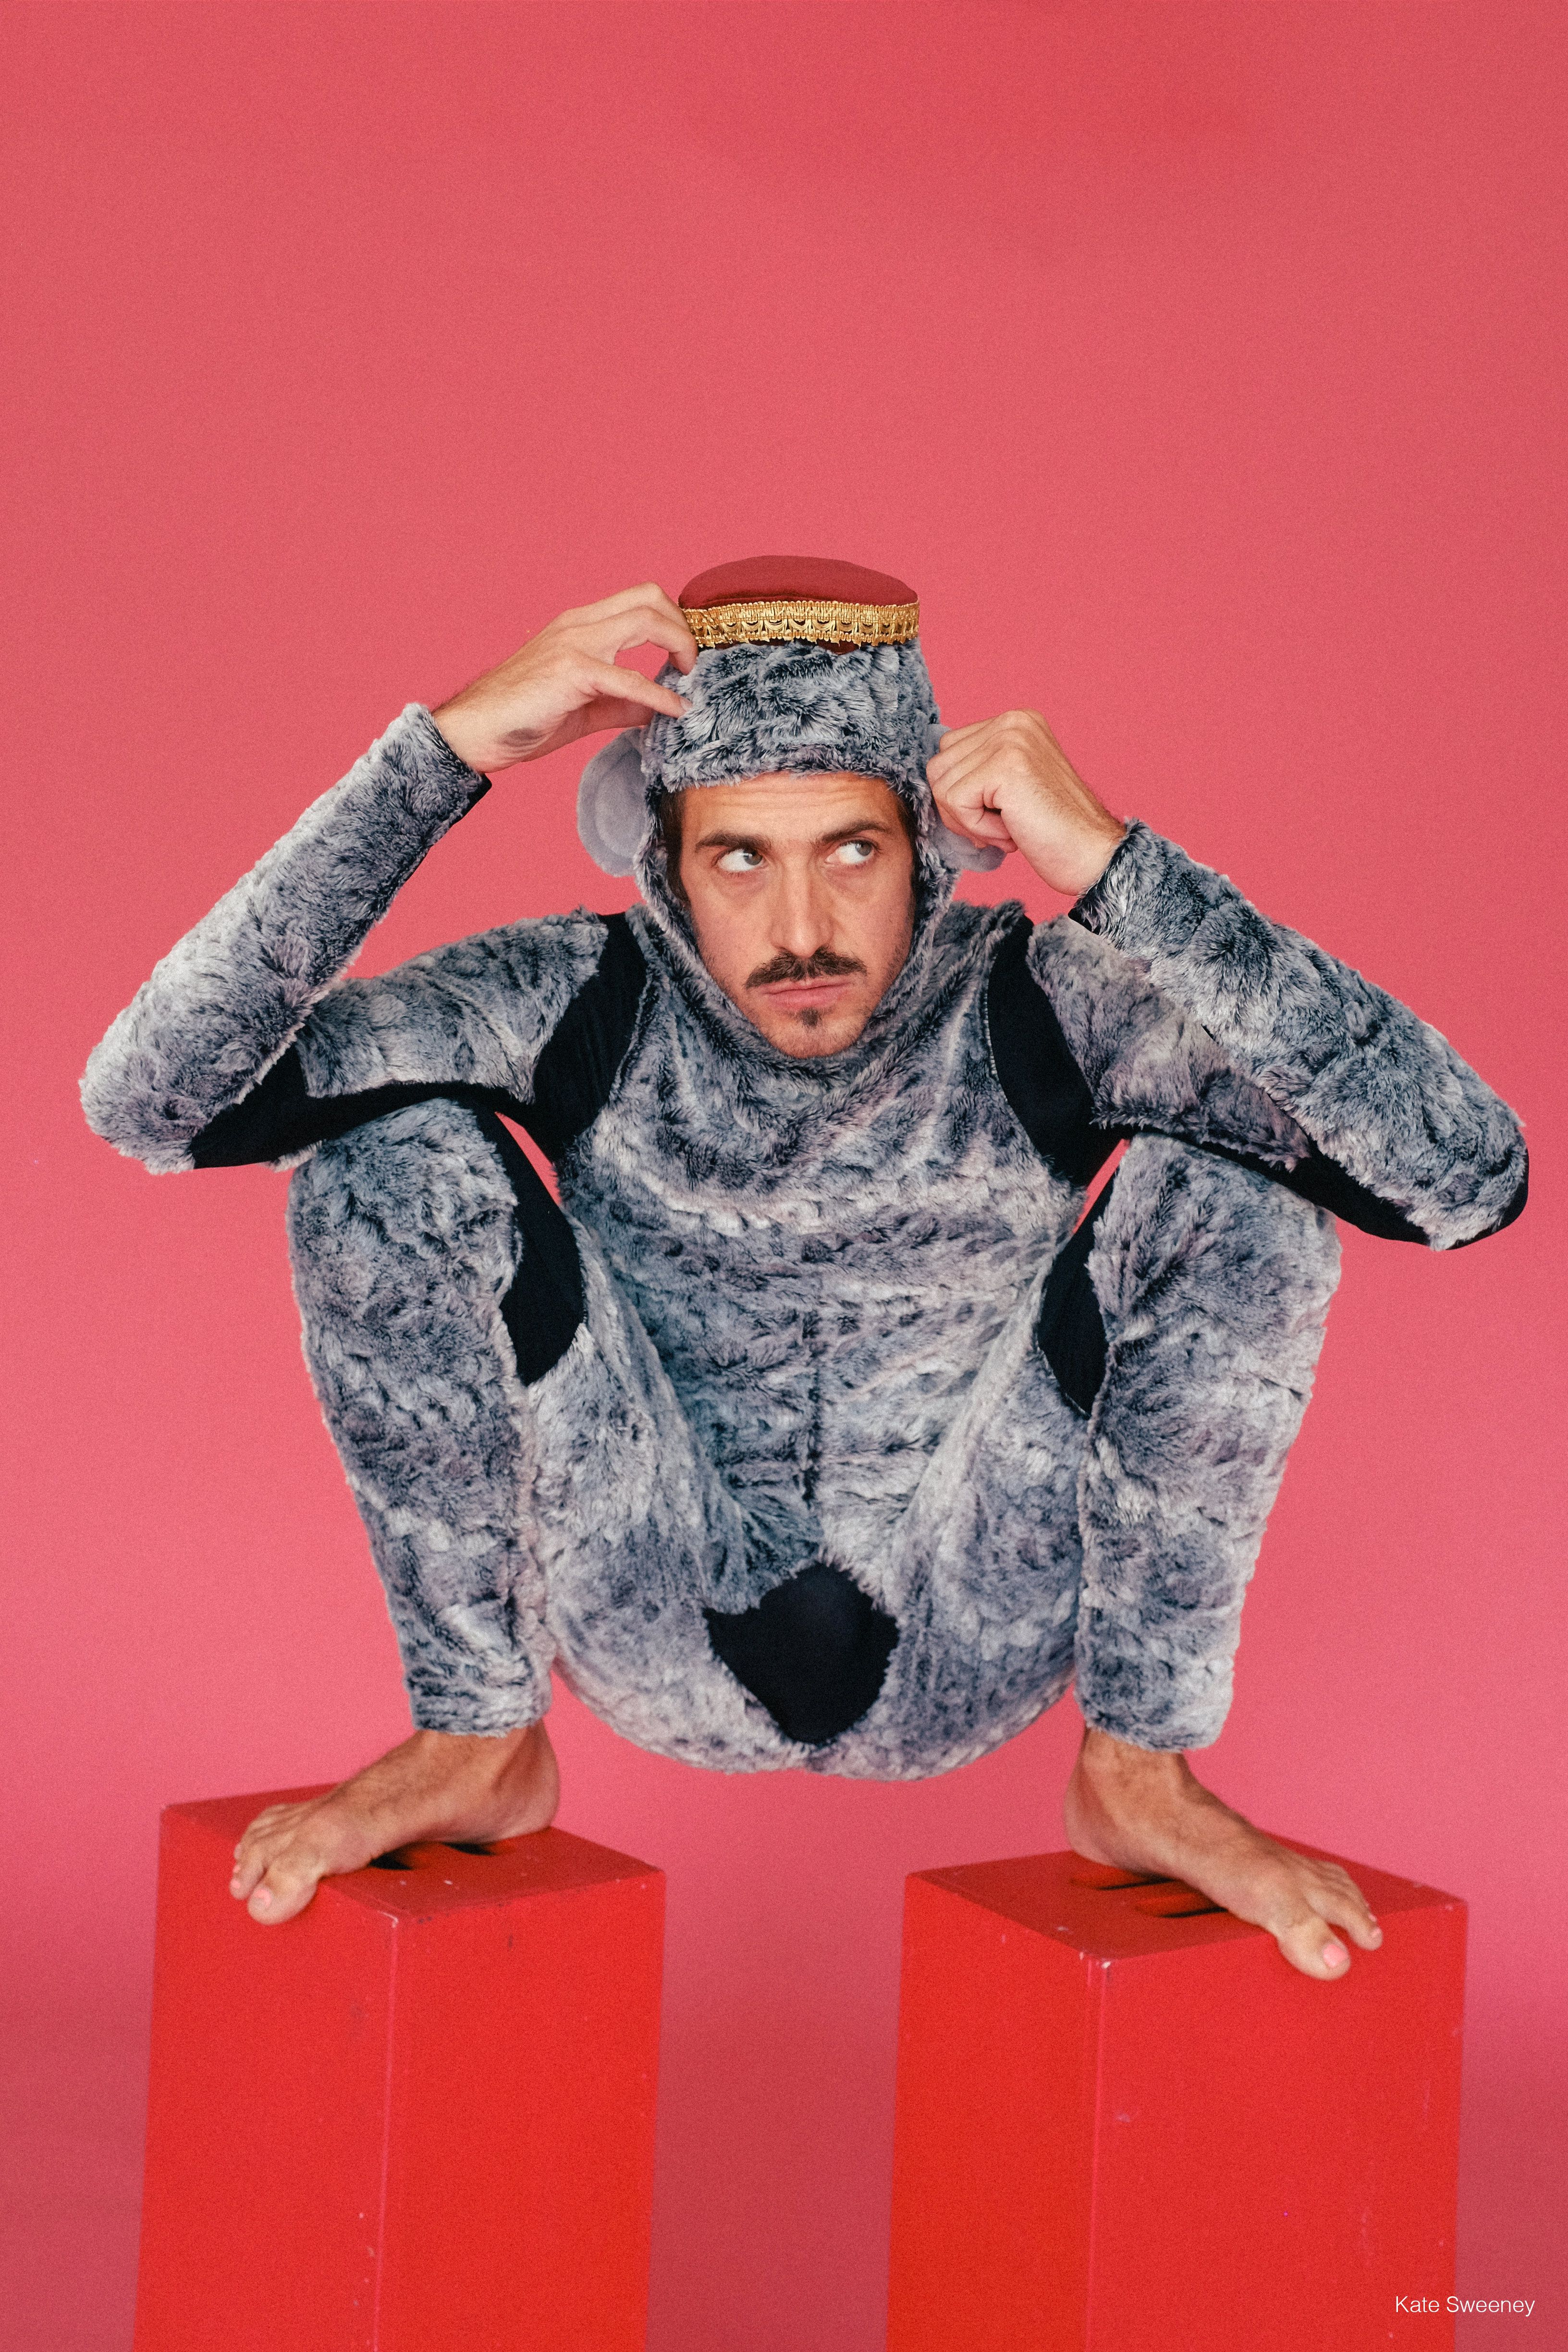 A man with a puzzled look dressed in a gray, fur-like jumpsuit, complete with monkey ears and a red fez, crouches atop two red blocks. His upper arms rest on his bent knees as his hands come to his temples.